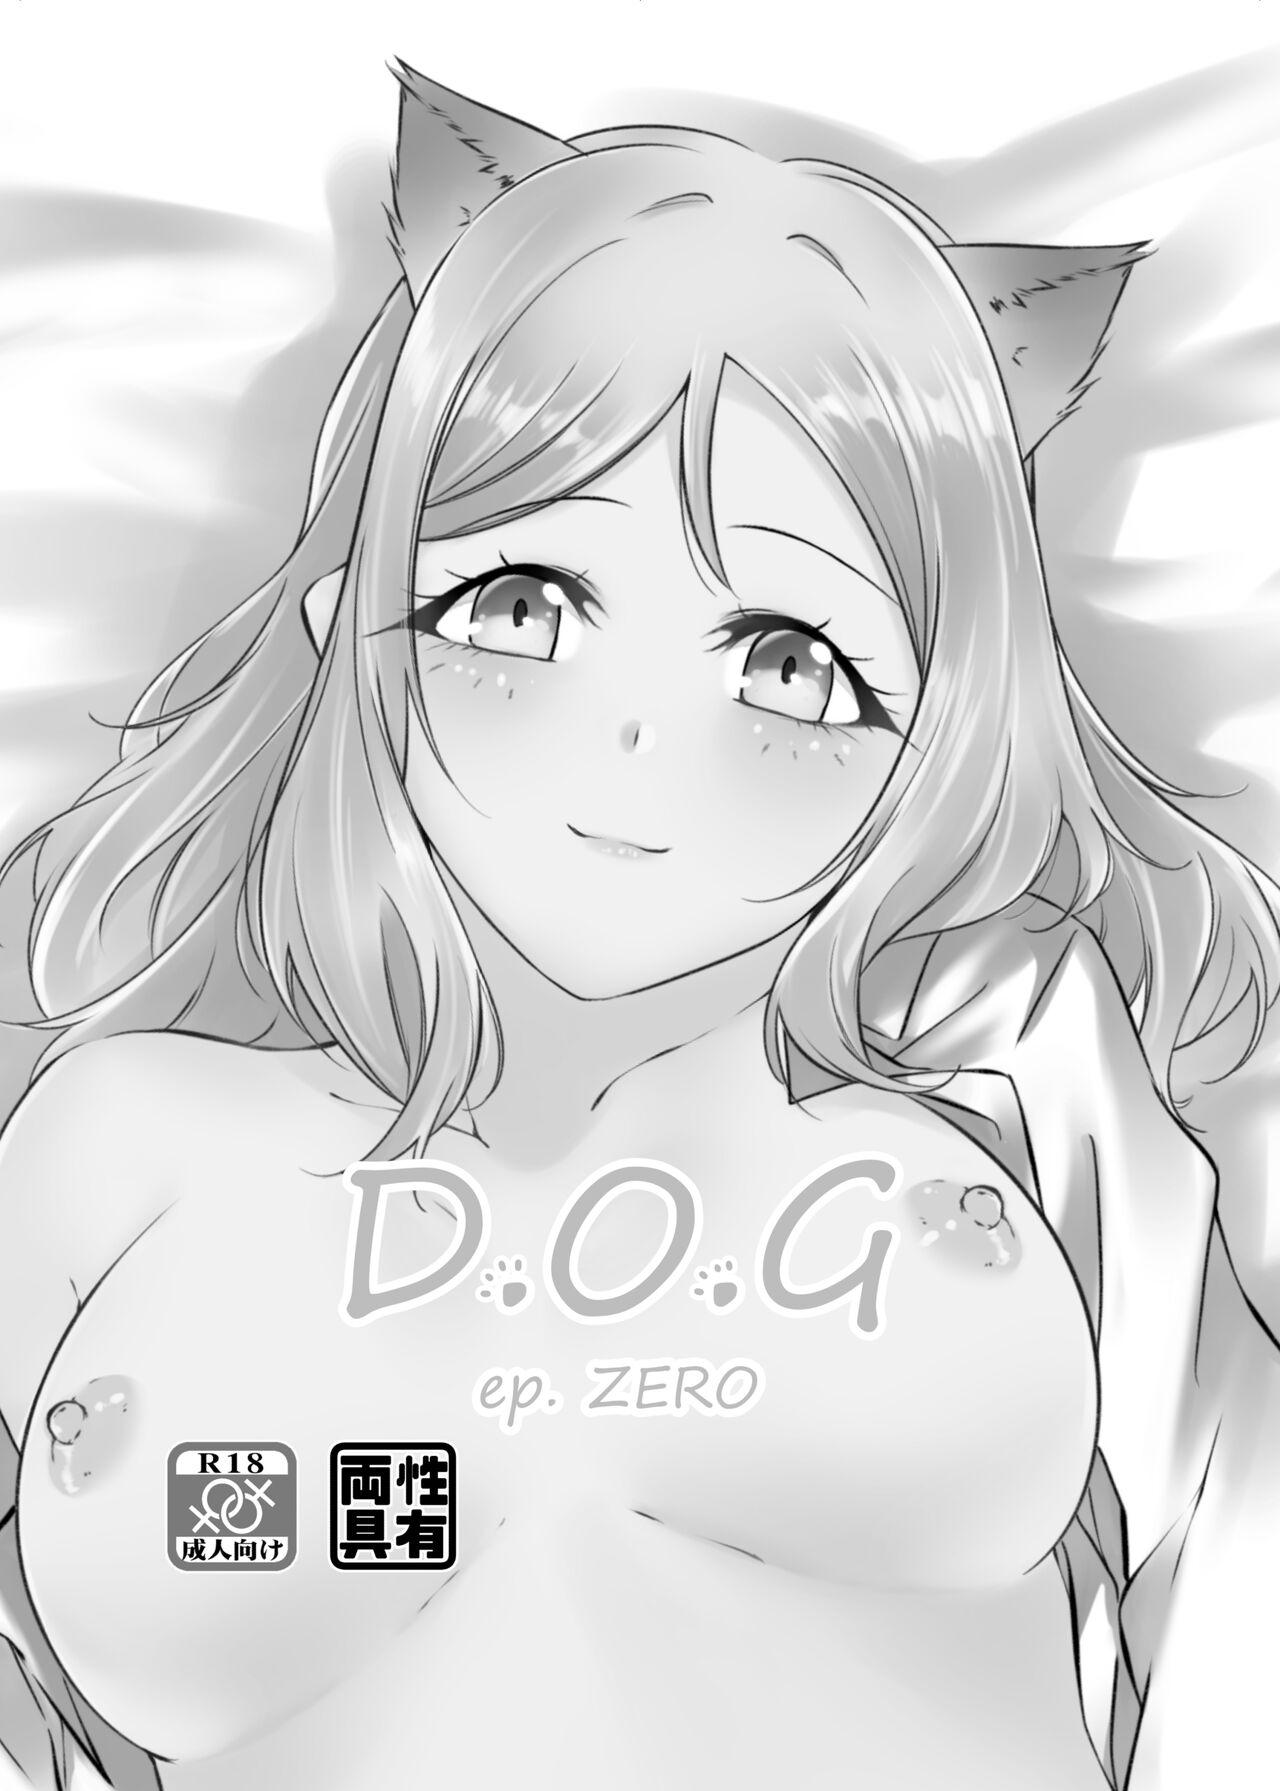 Bokep D.O.G ep. ZERO + D.O.G side.KANAN - Love live sunshine Gay Party - Picture 1